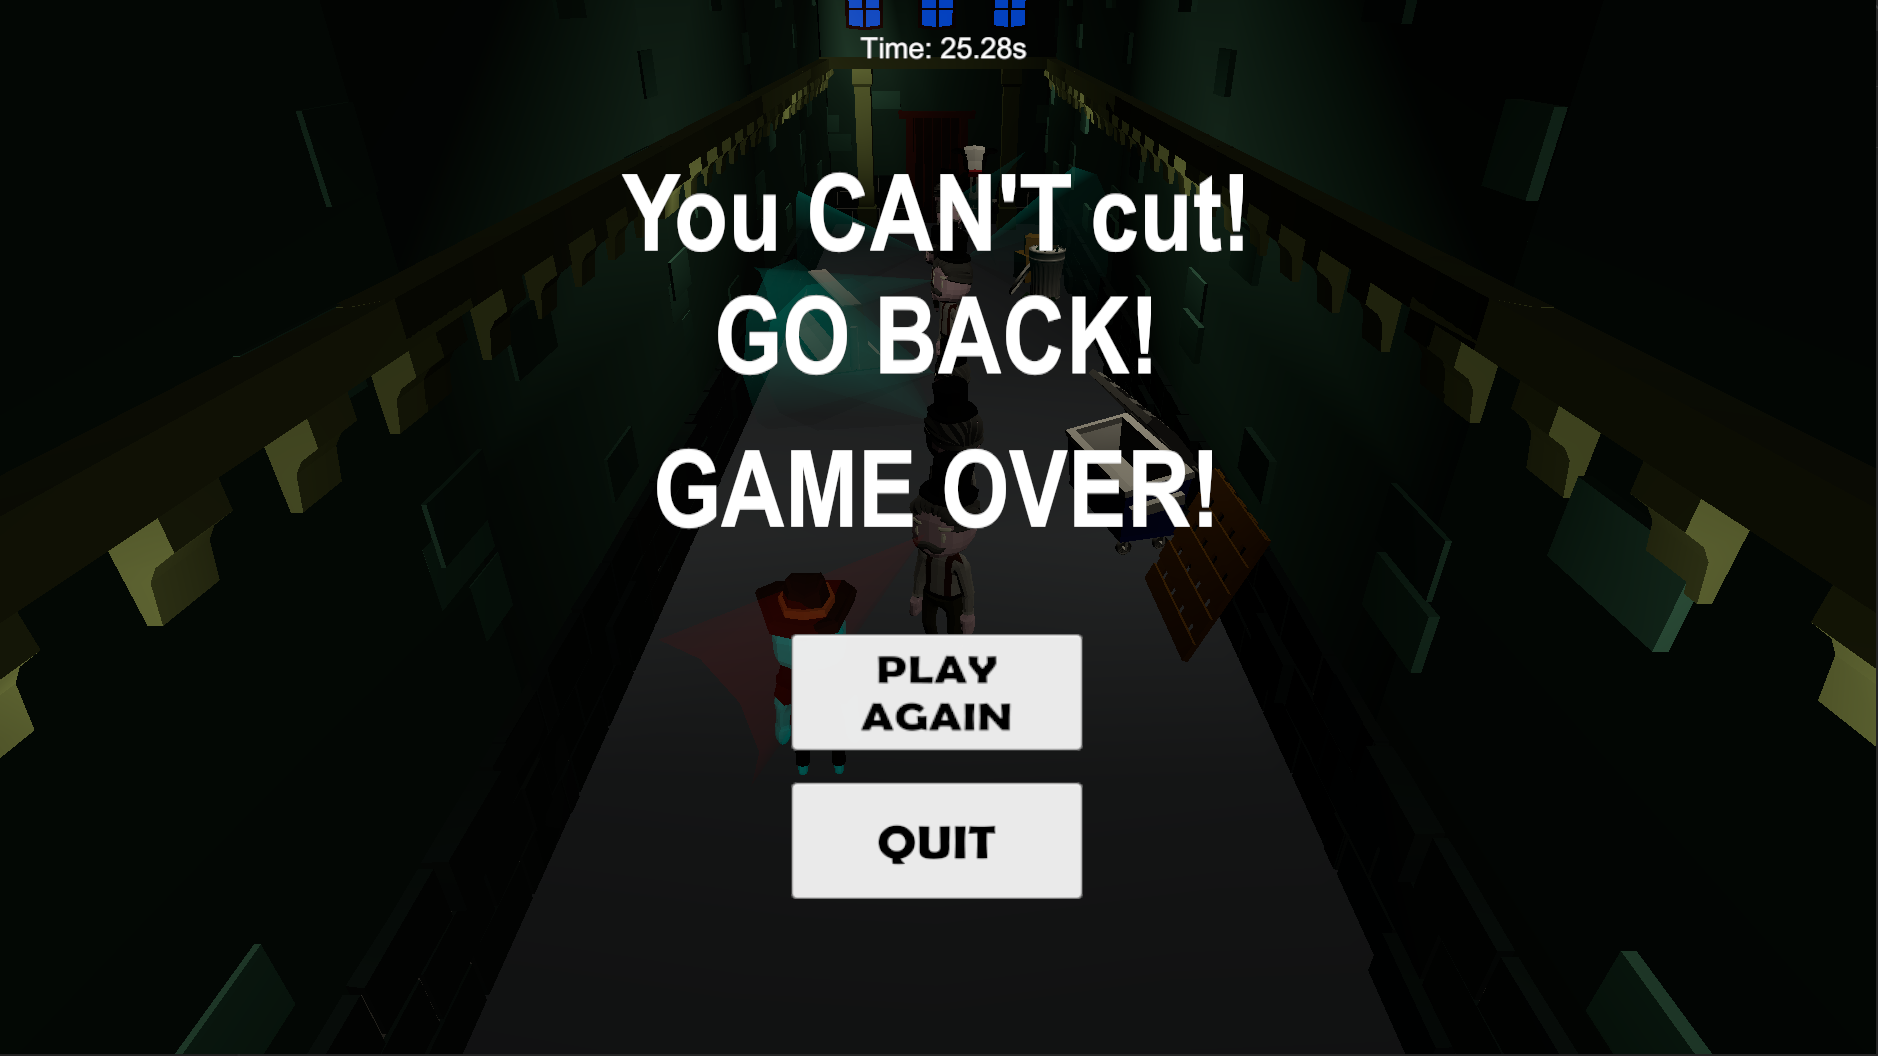 Screenshot of the game over screen.